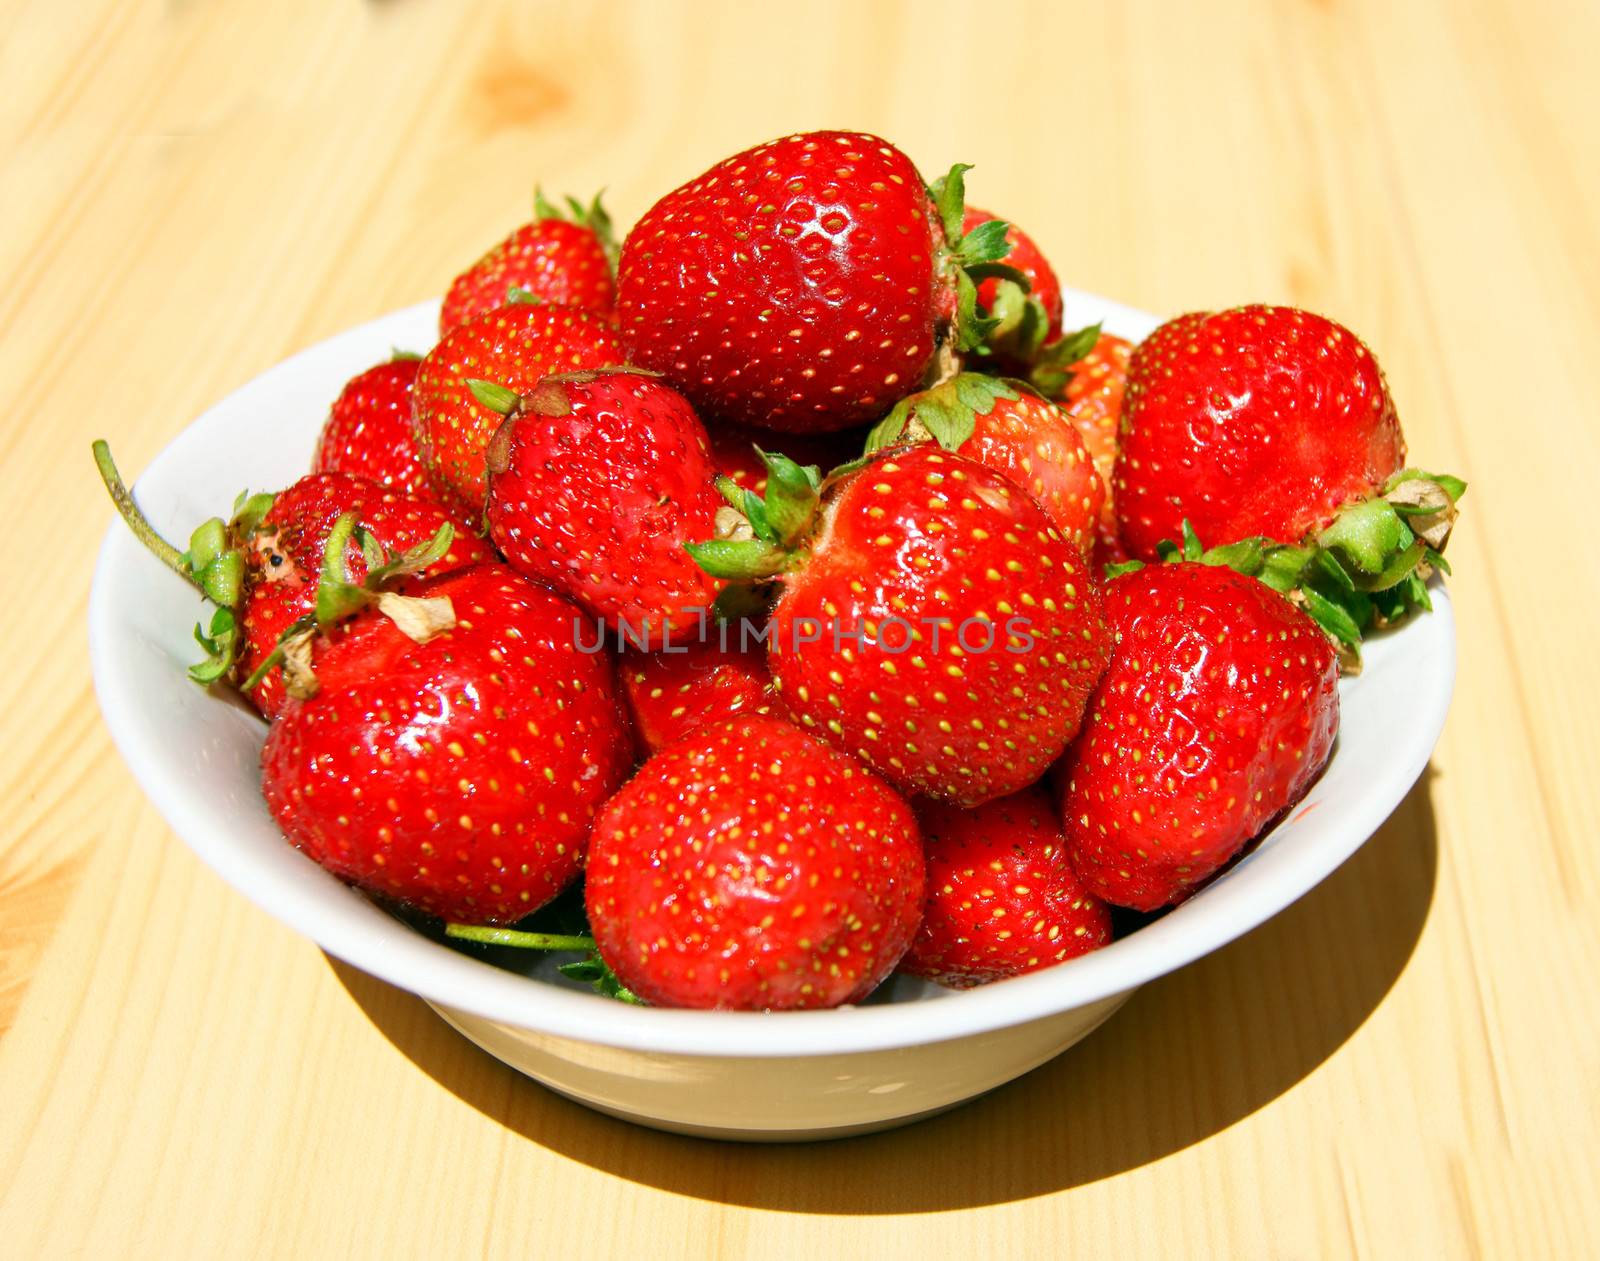 Berry strawberry ripe in plate by cobol1964